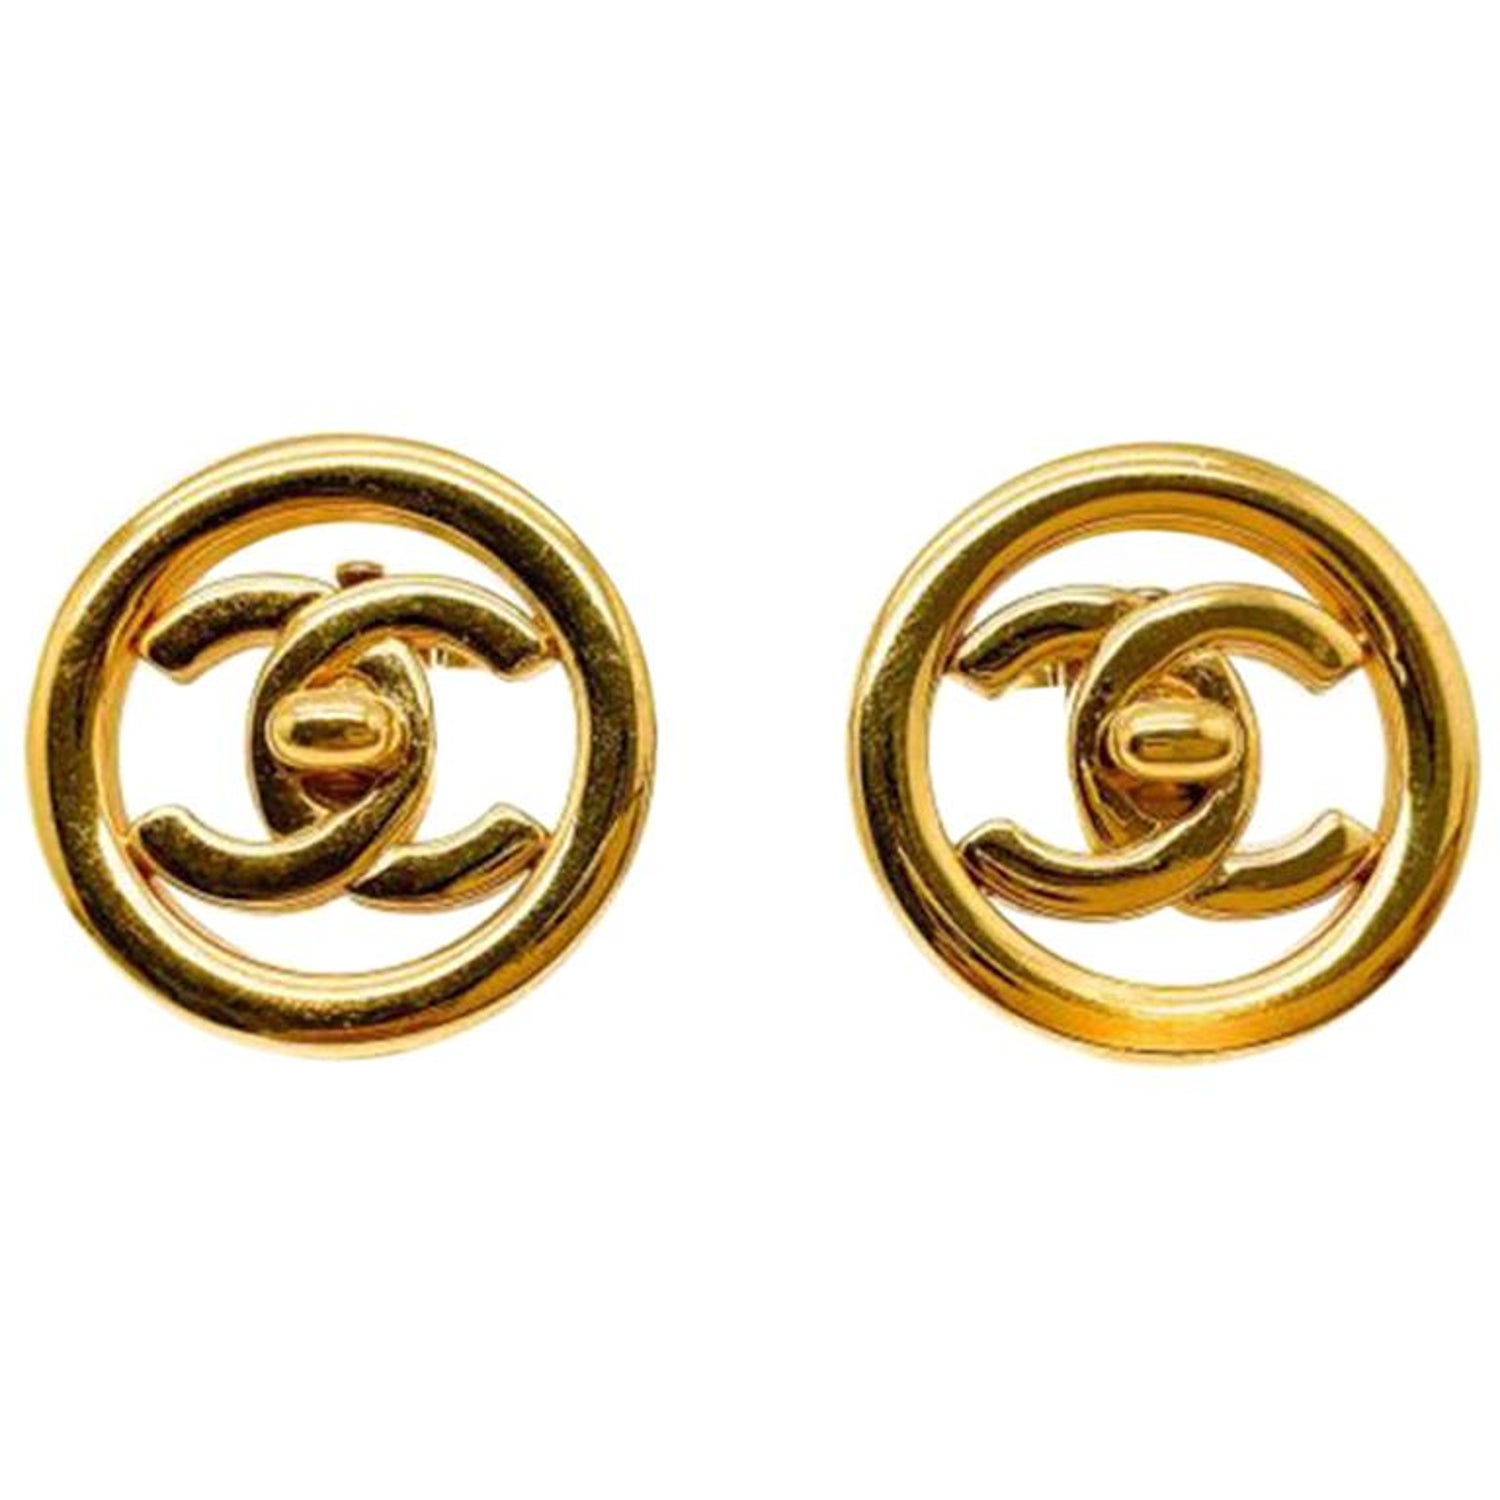 Chanel Classic Flap Bag Earrings - 4 For Sale on 1stDibs